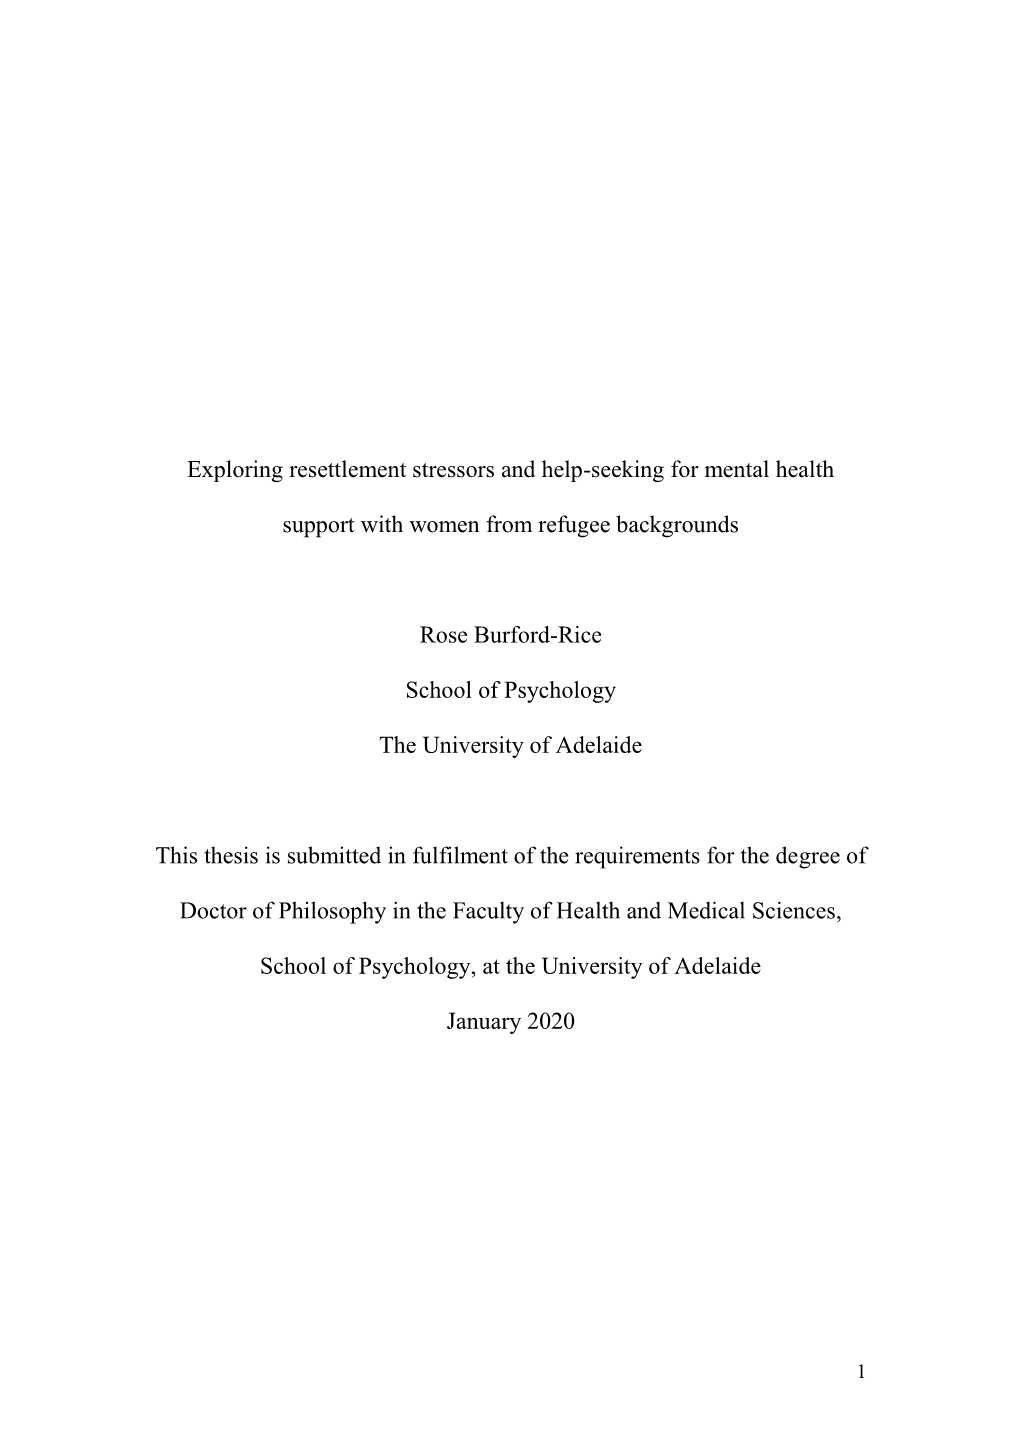 Exploring Resettlement Stressors and Help-Seeking for Mental Health